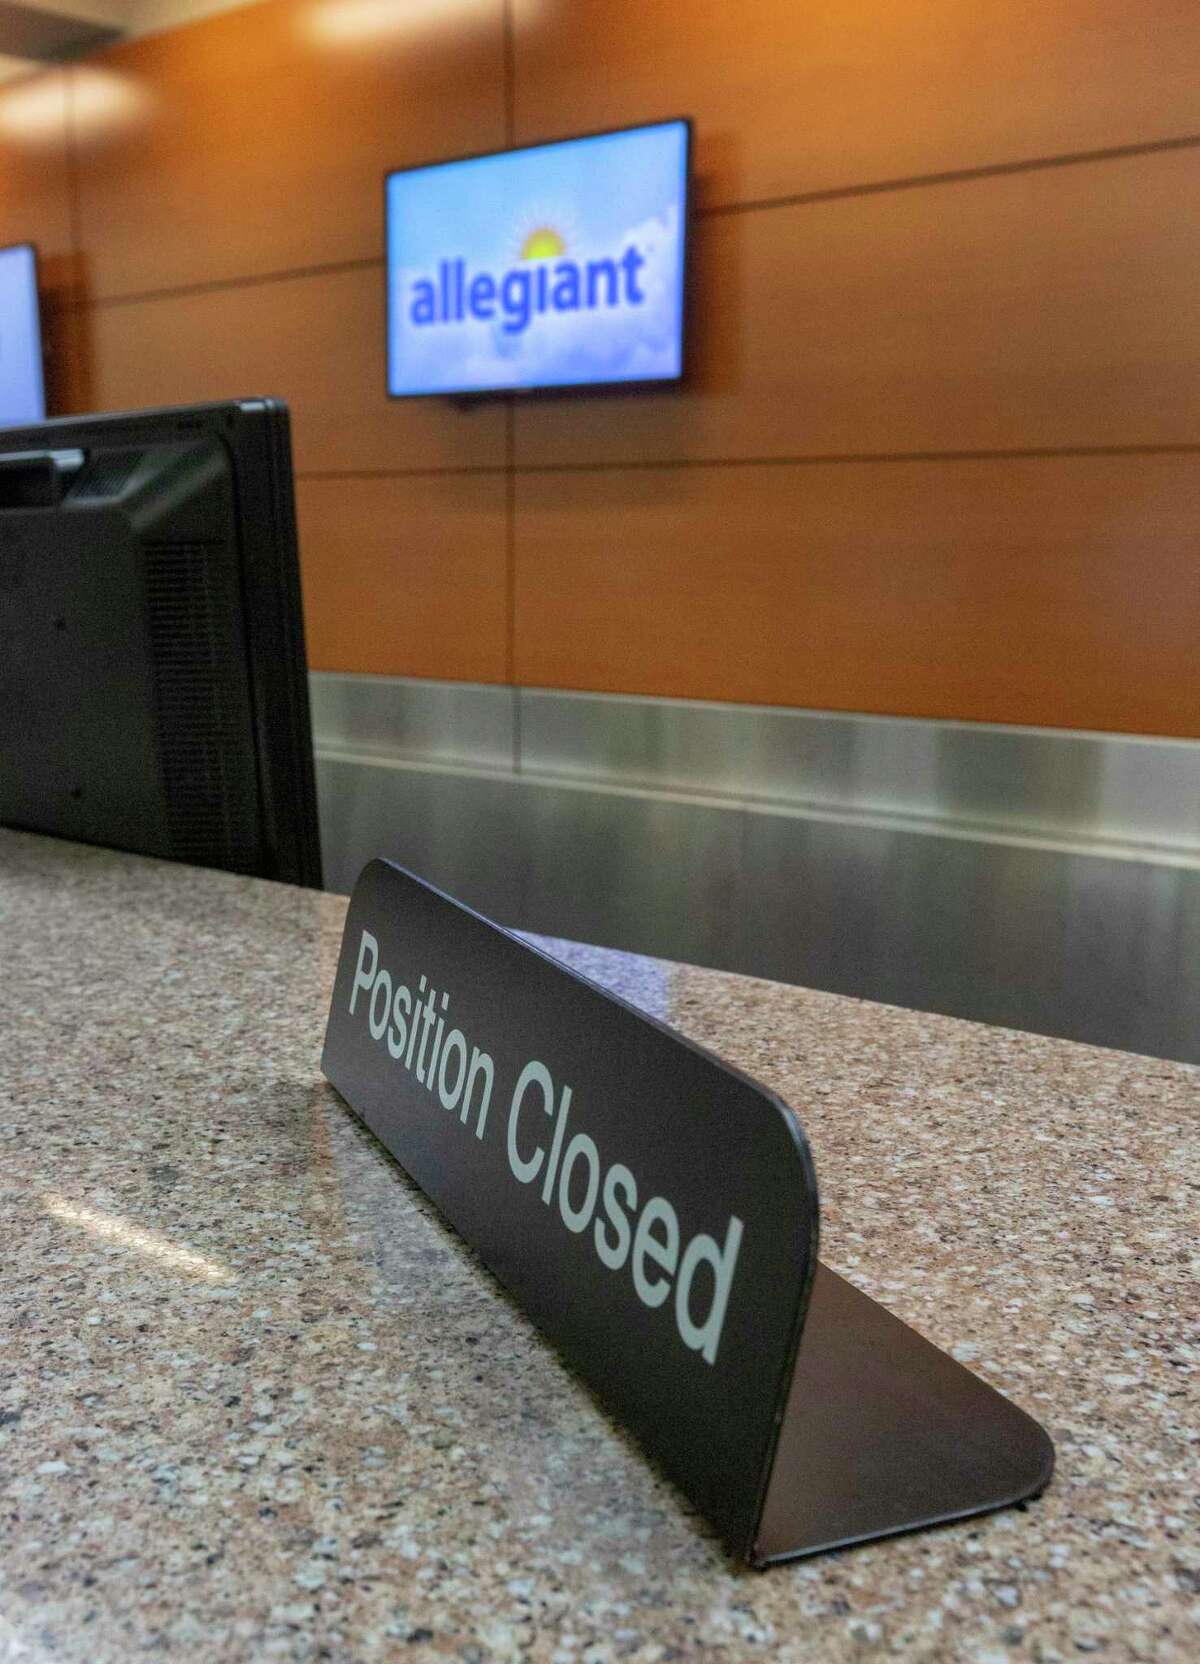 The Allegiant airline ticket counter stands empty Wednesday, April 22, 2020 at the San Antonio International Airport. Despite receiving $172 million in federal stimulus money, Allegiant is asking for a waiver from the government to allow it to cut San Antonio service.